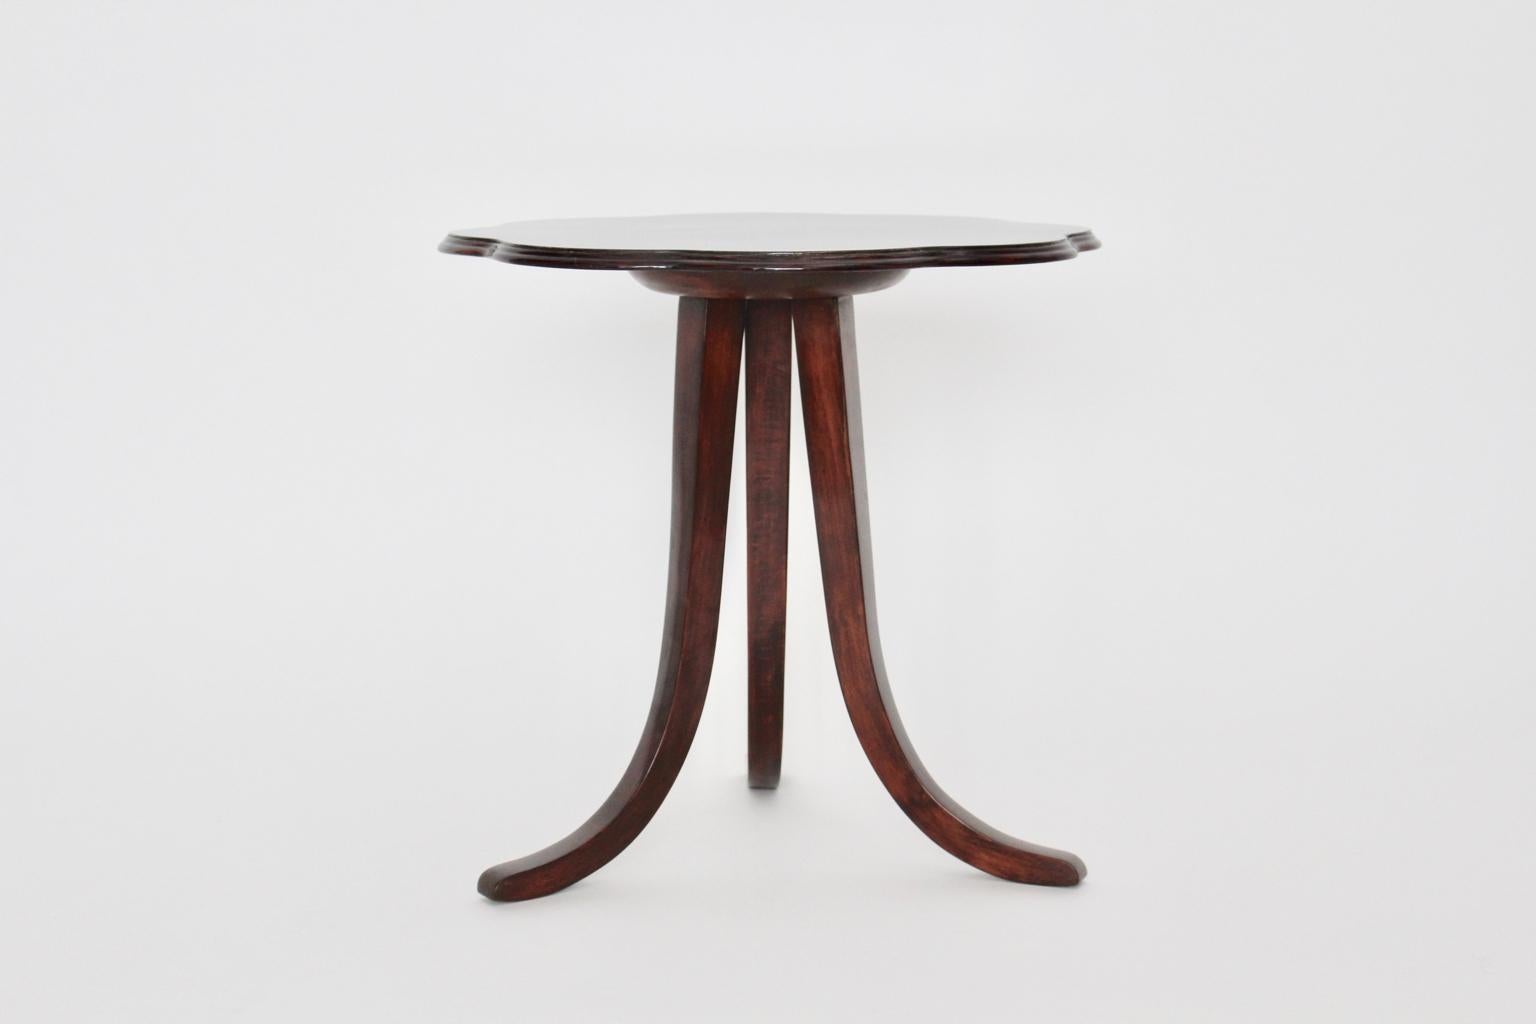 Art Deco Walnut Side Table or Coffee Table by Josef Frank for Thonet, circa 1925 For Sale 2